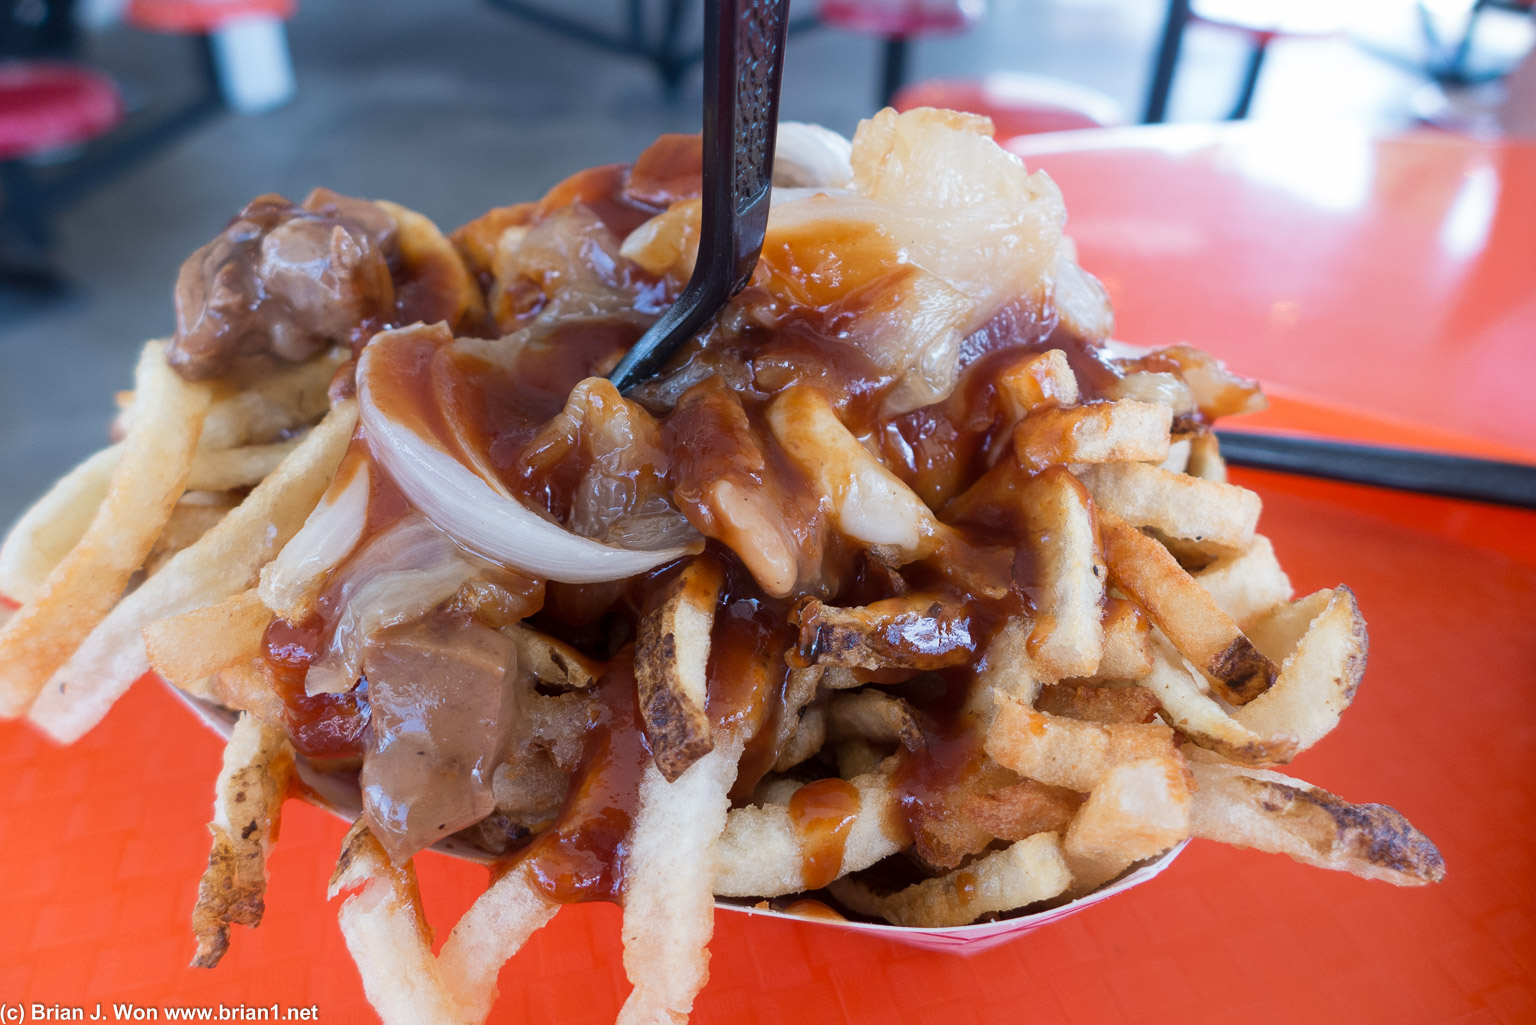 Dirty fries. Just ok.